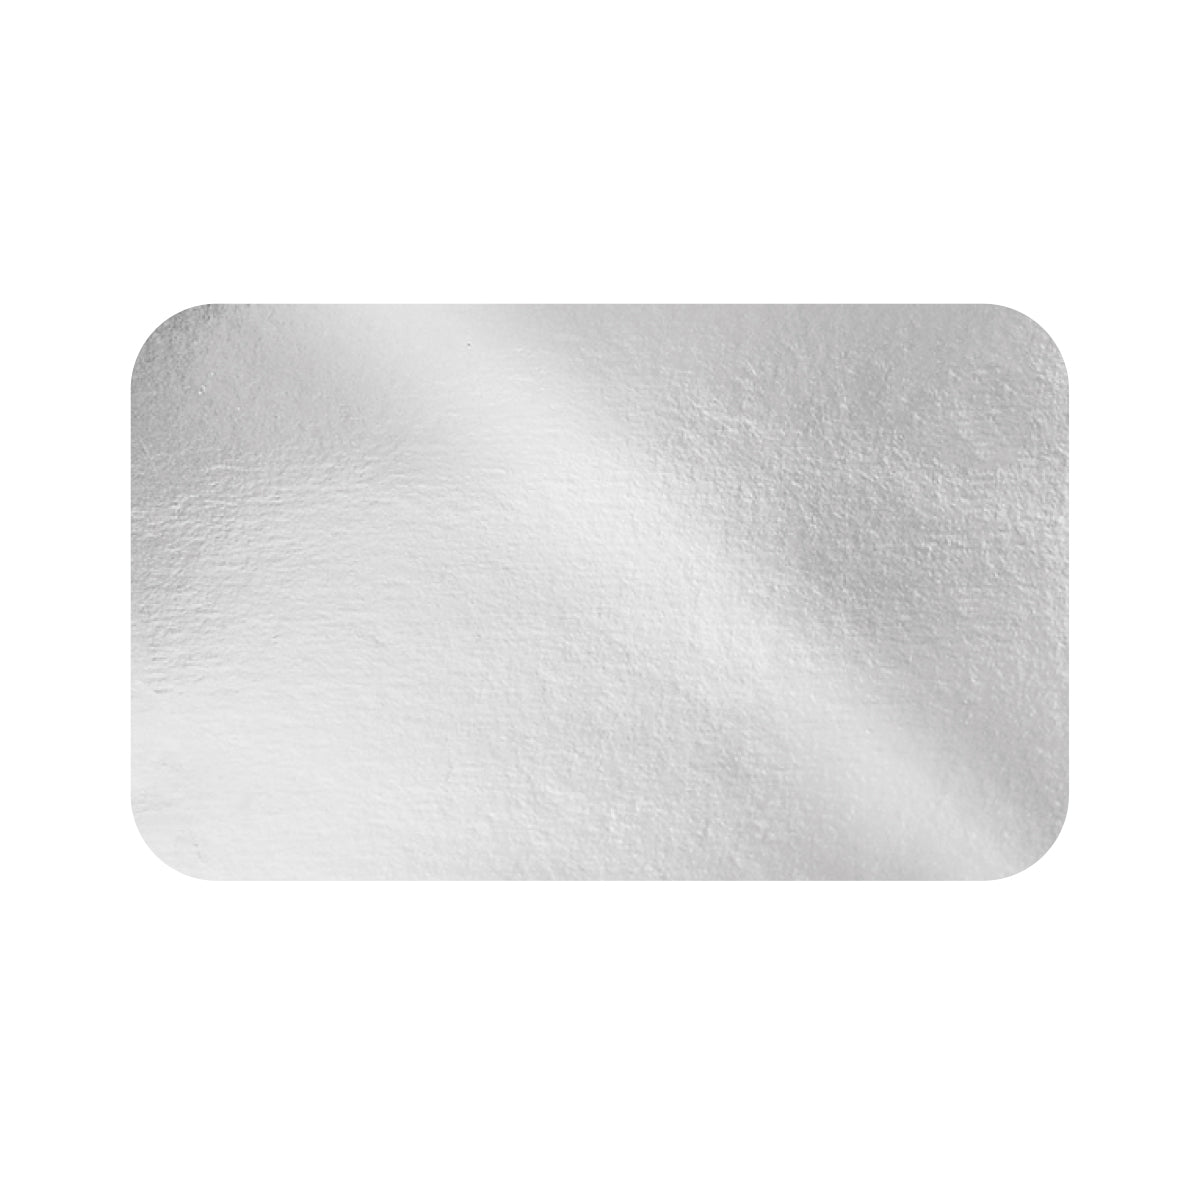 Lid for 2.25 LB Oblong Take Out Pan | Paper Board (Case of 500)